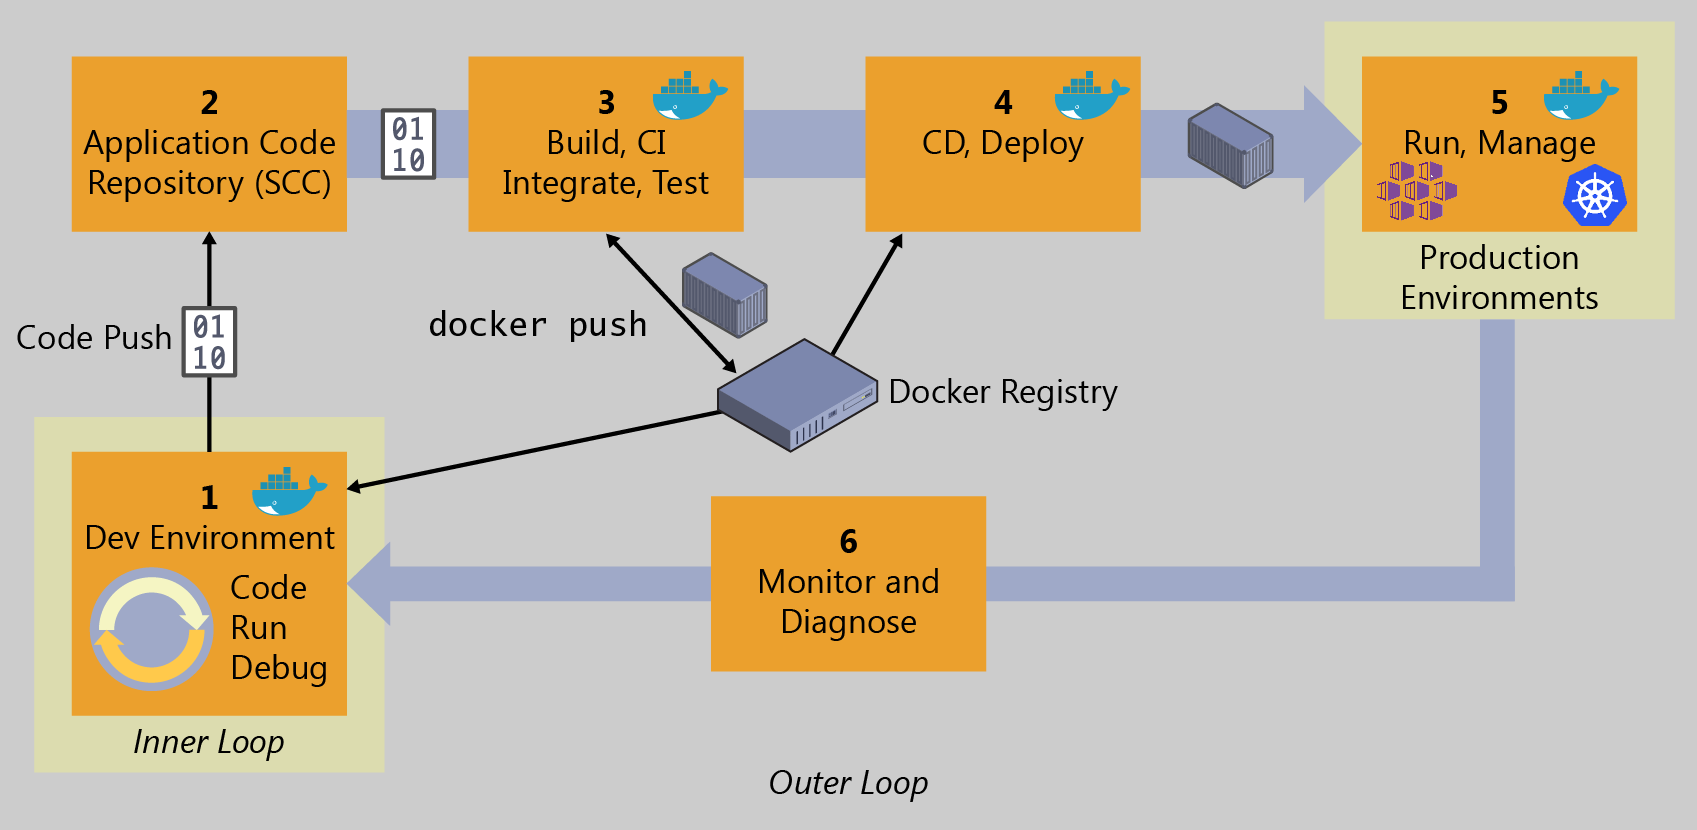 Diagram showing the generic end-to-end life cycle of a Docker app.